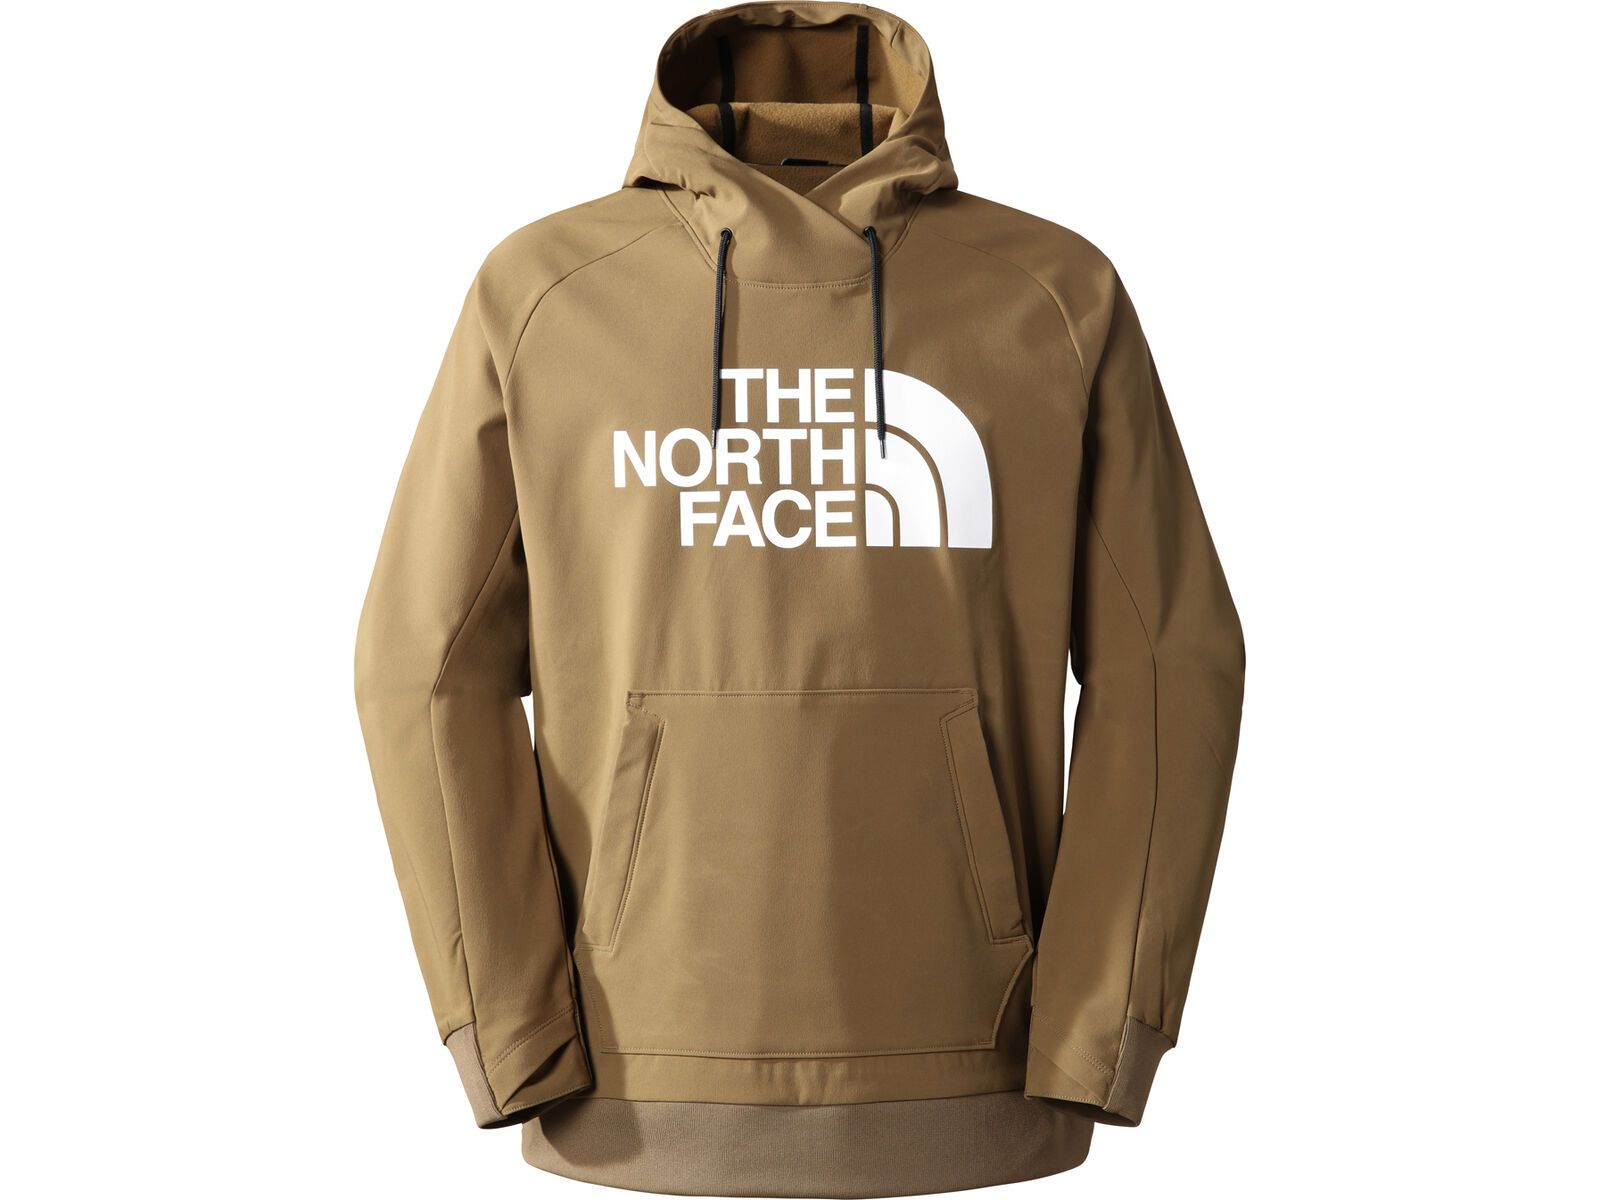 The North Face Men's Tekno Logo Hoodie, military olive